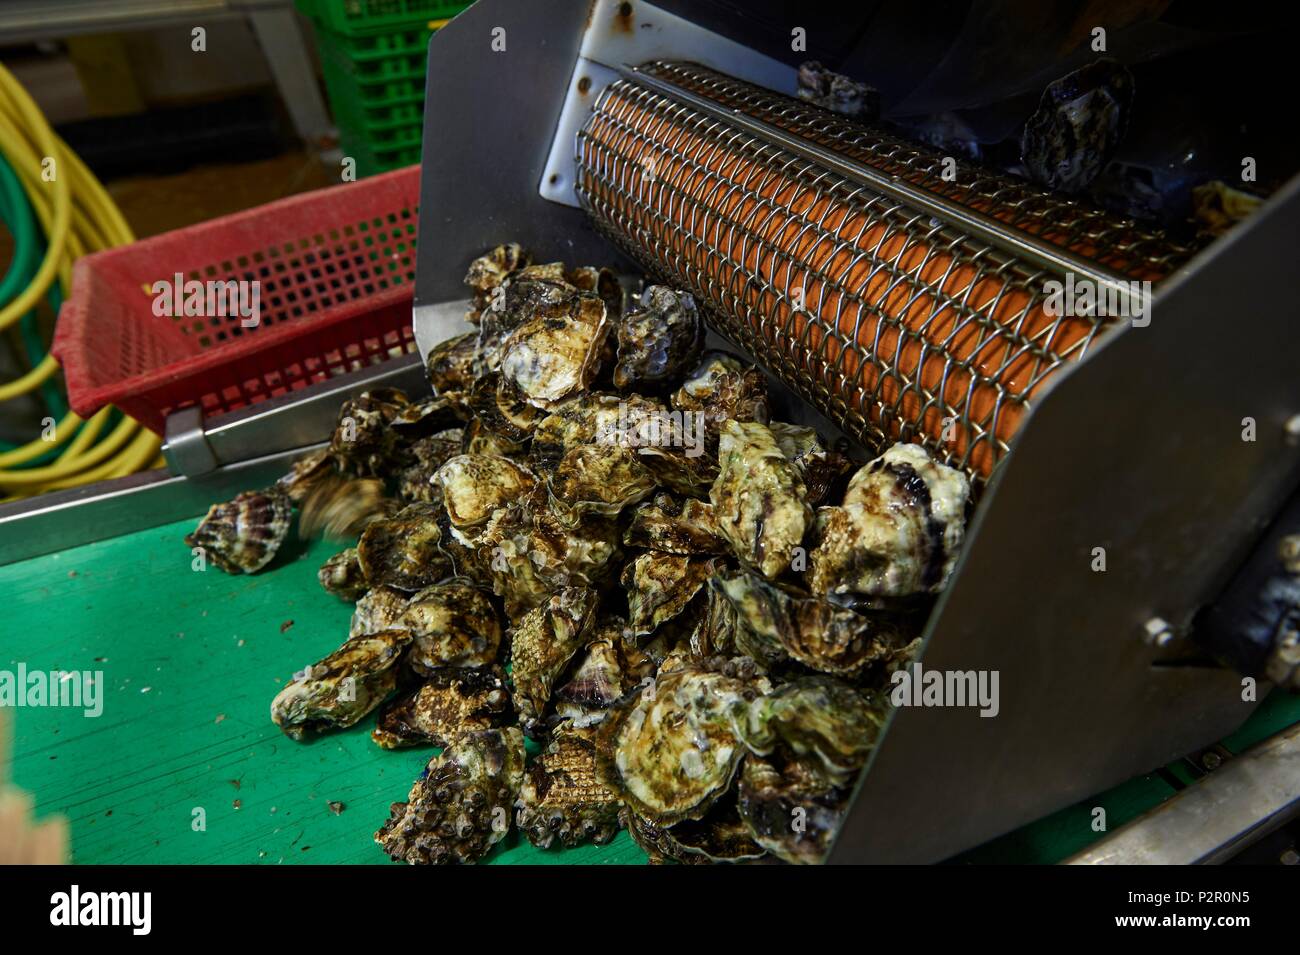 France, Herault, Marseillan, oyster farming, Tarbouriech company, oyster farming, preparation and sorting of oysters before their commercialization Stock Photo